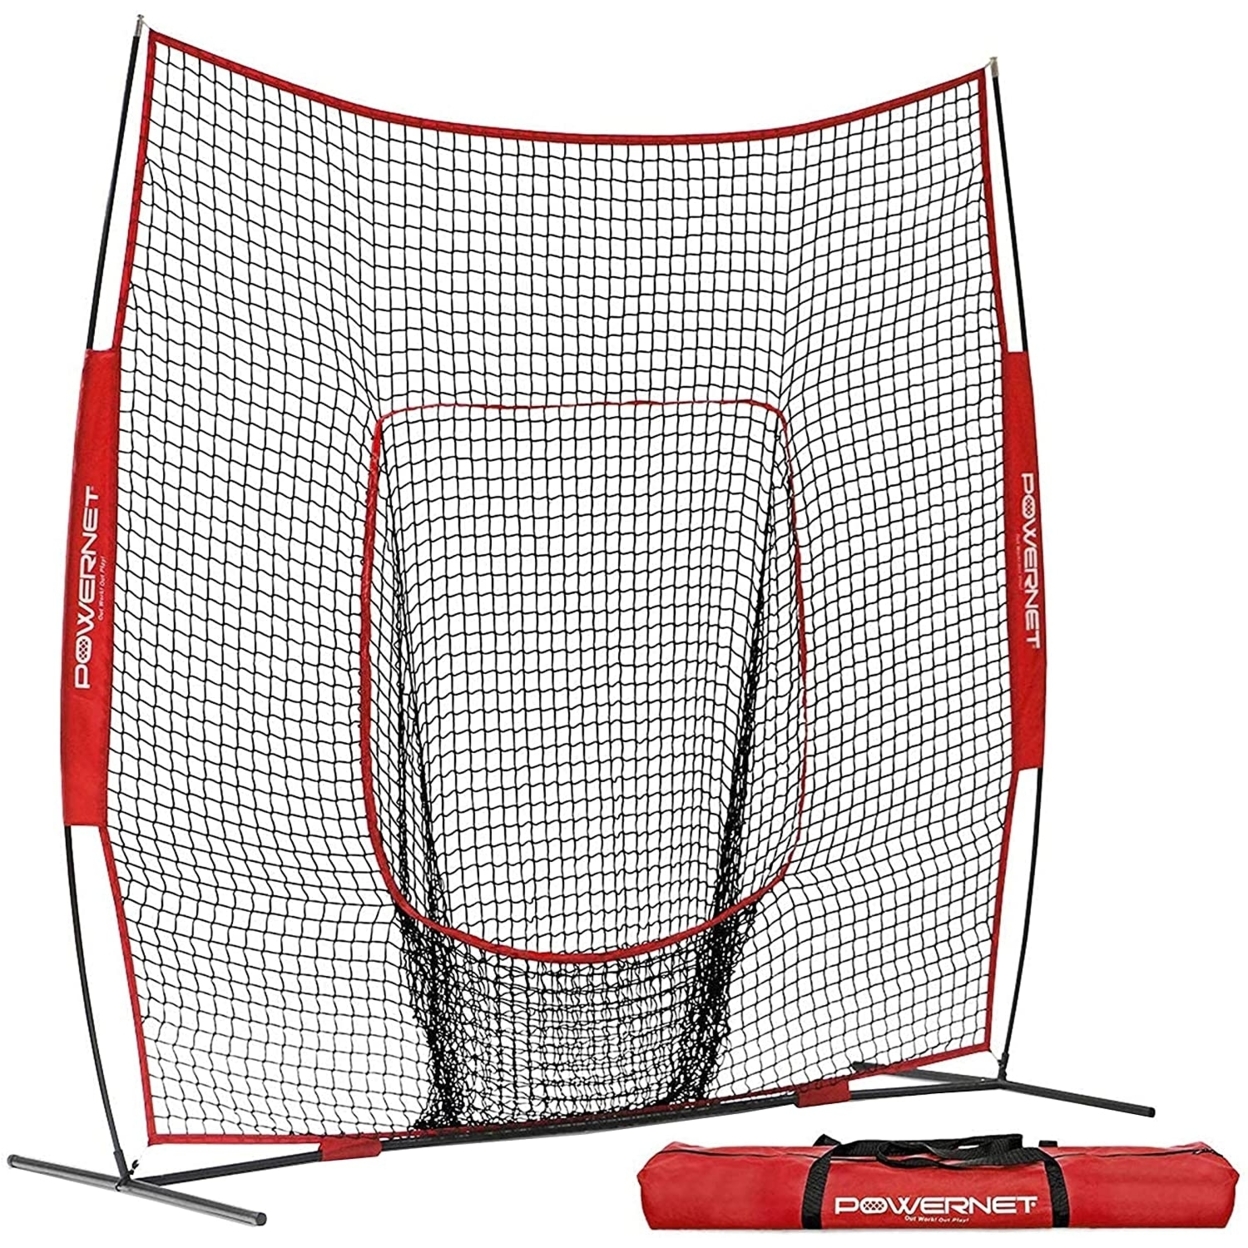 PowerNet 8x8 Modular Frame Hitting Net Ultra Portable With Quick Setup (1152) - Red